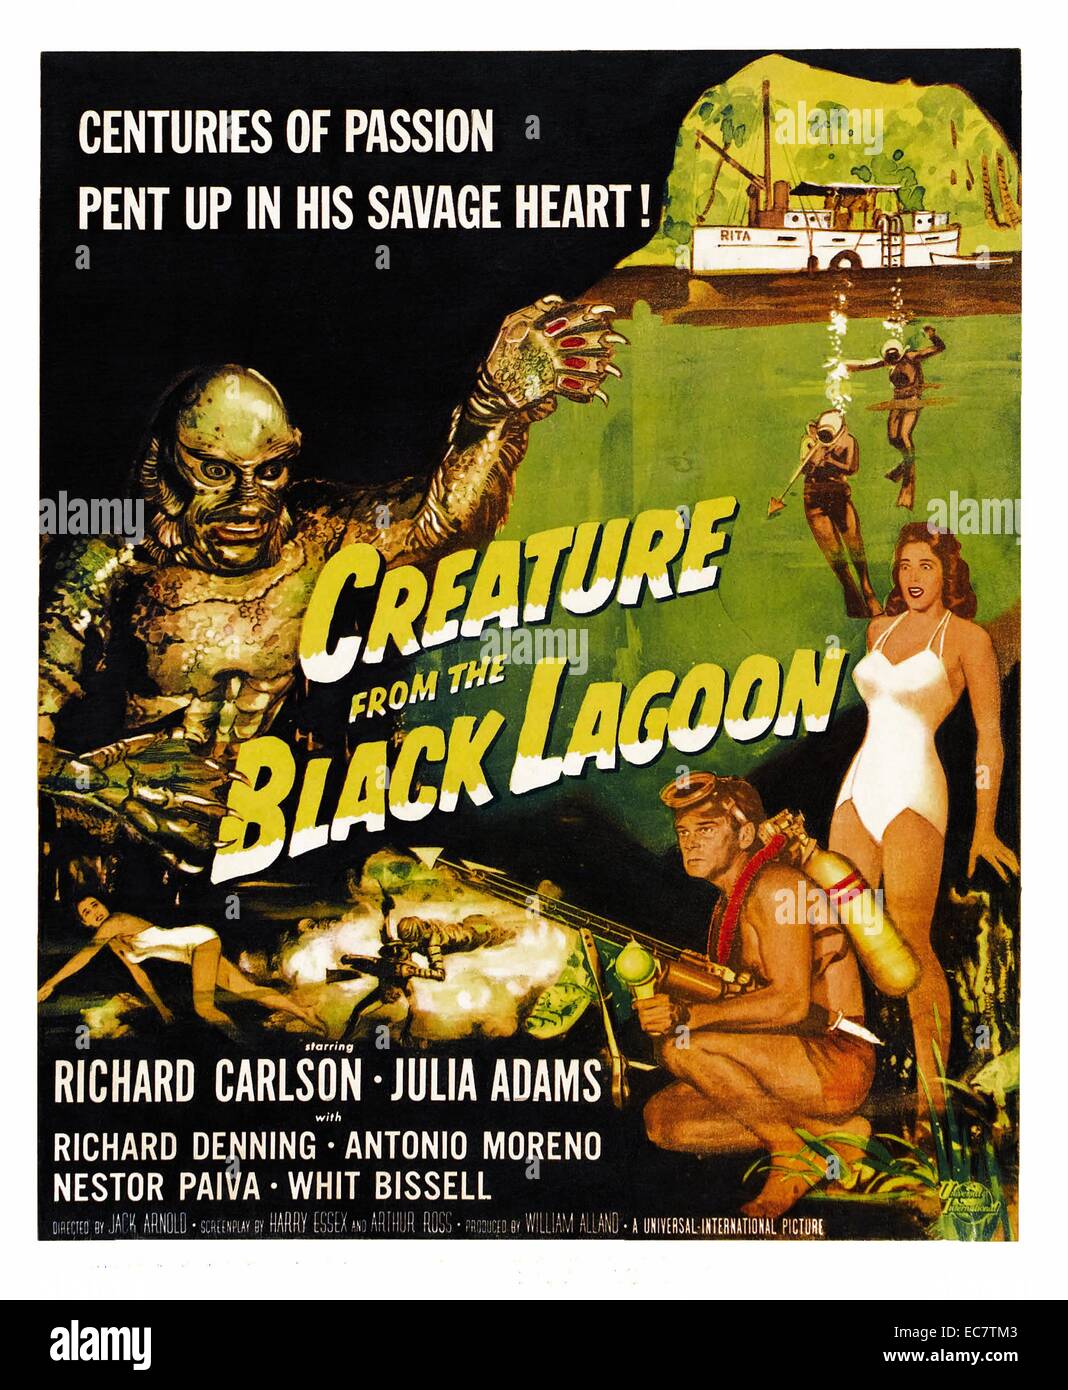 Creature from the Black Lagoon is a 1954 monster horror 3-D film in black-and-white, directed by Jack Arnold and starring Richard Carlson, Julia Adams, Richard Denning, Antonio Moreno and Whit Bissell. The Creature was played by Ben Chapman on land and by Ricou Browning underwater. Stock Photo